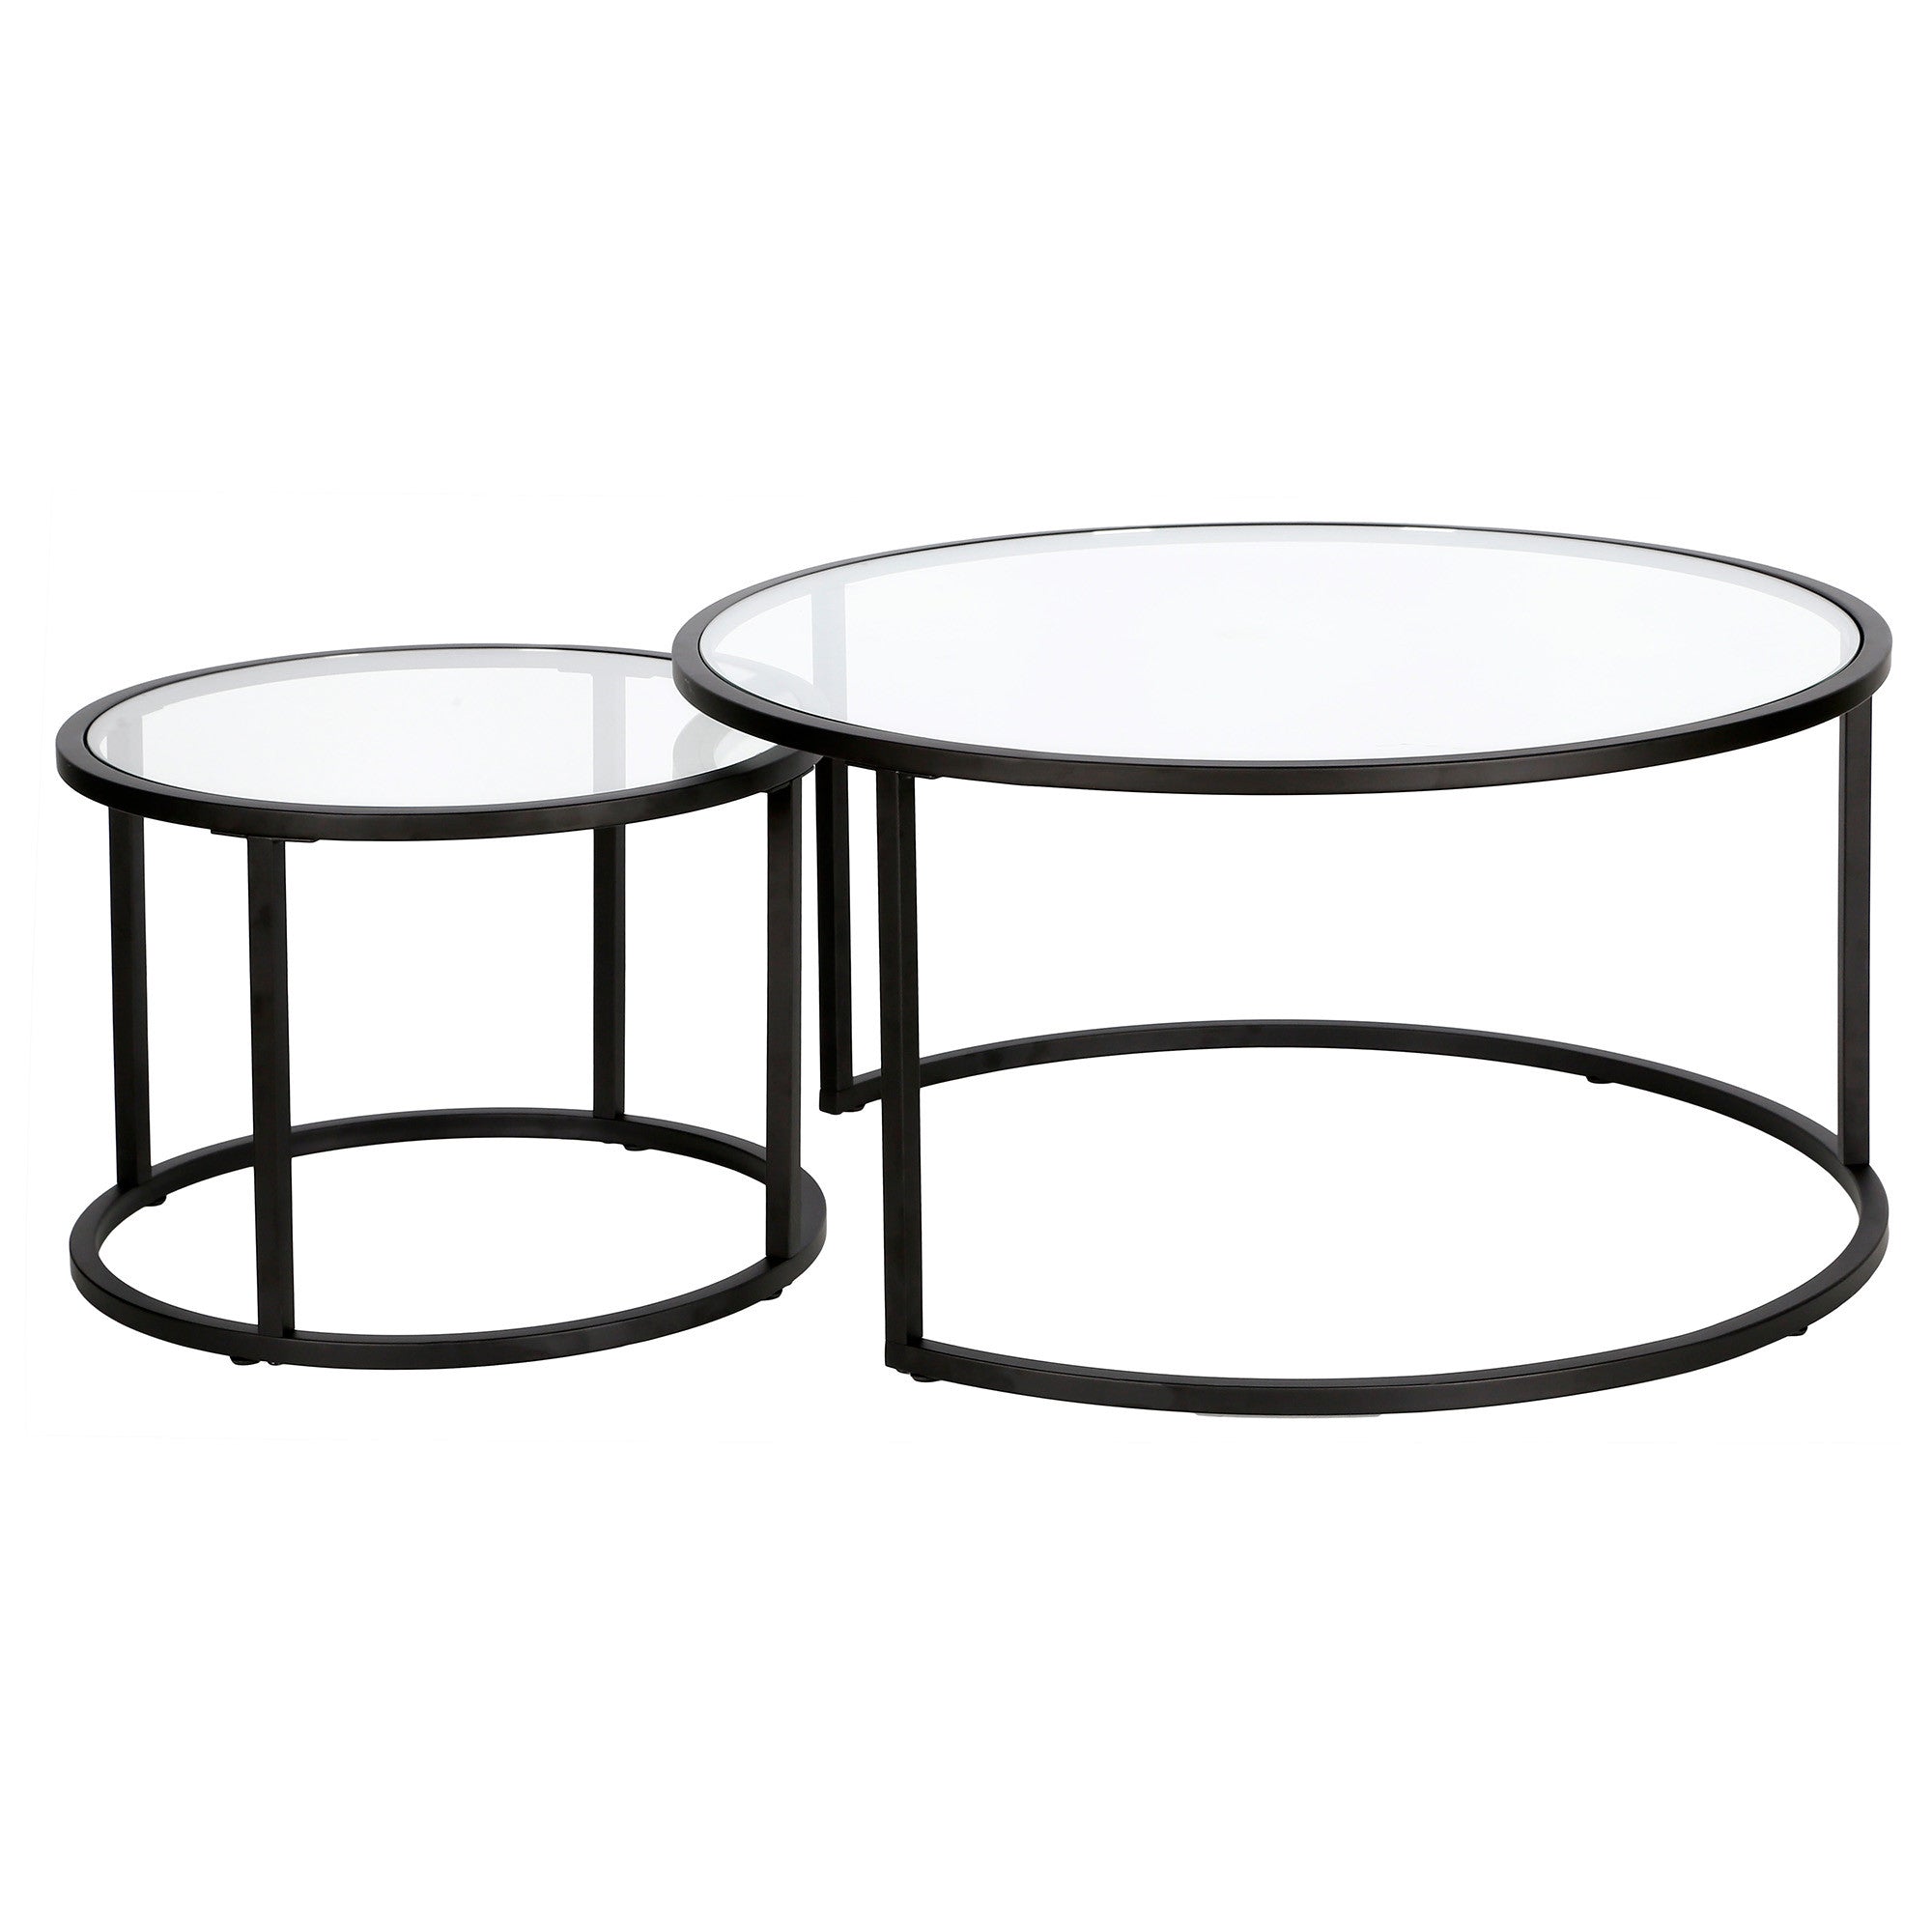 Set of Two 35" Black Glass And Steel Round Nested Coffee Tables